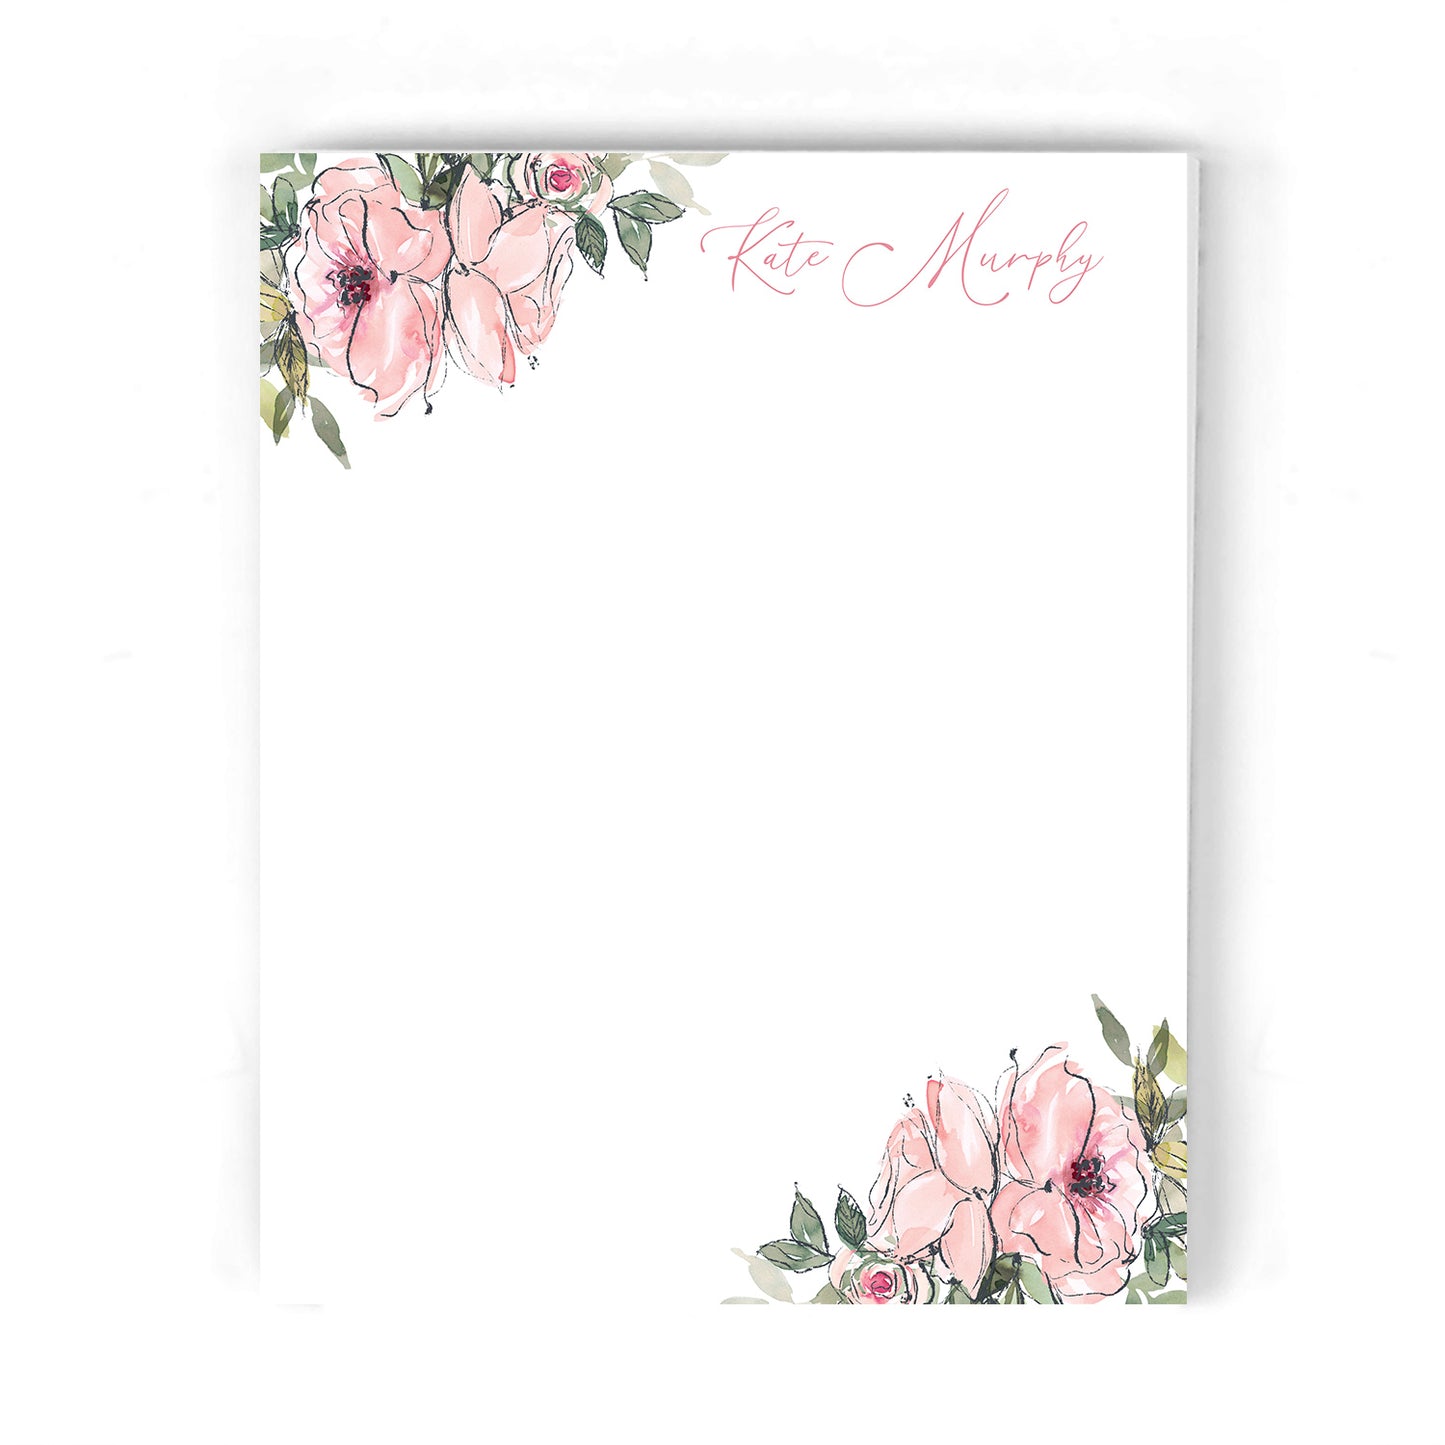 Pink and Greenery Notepad